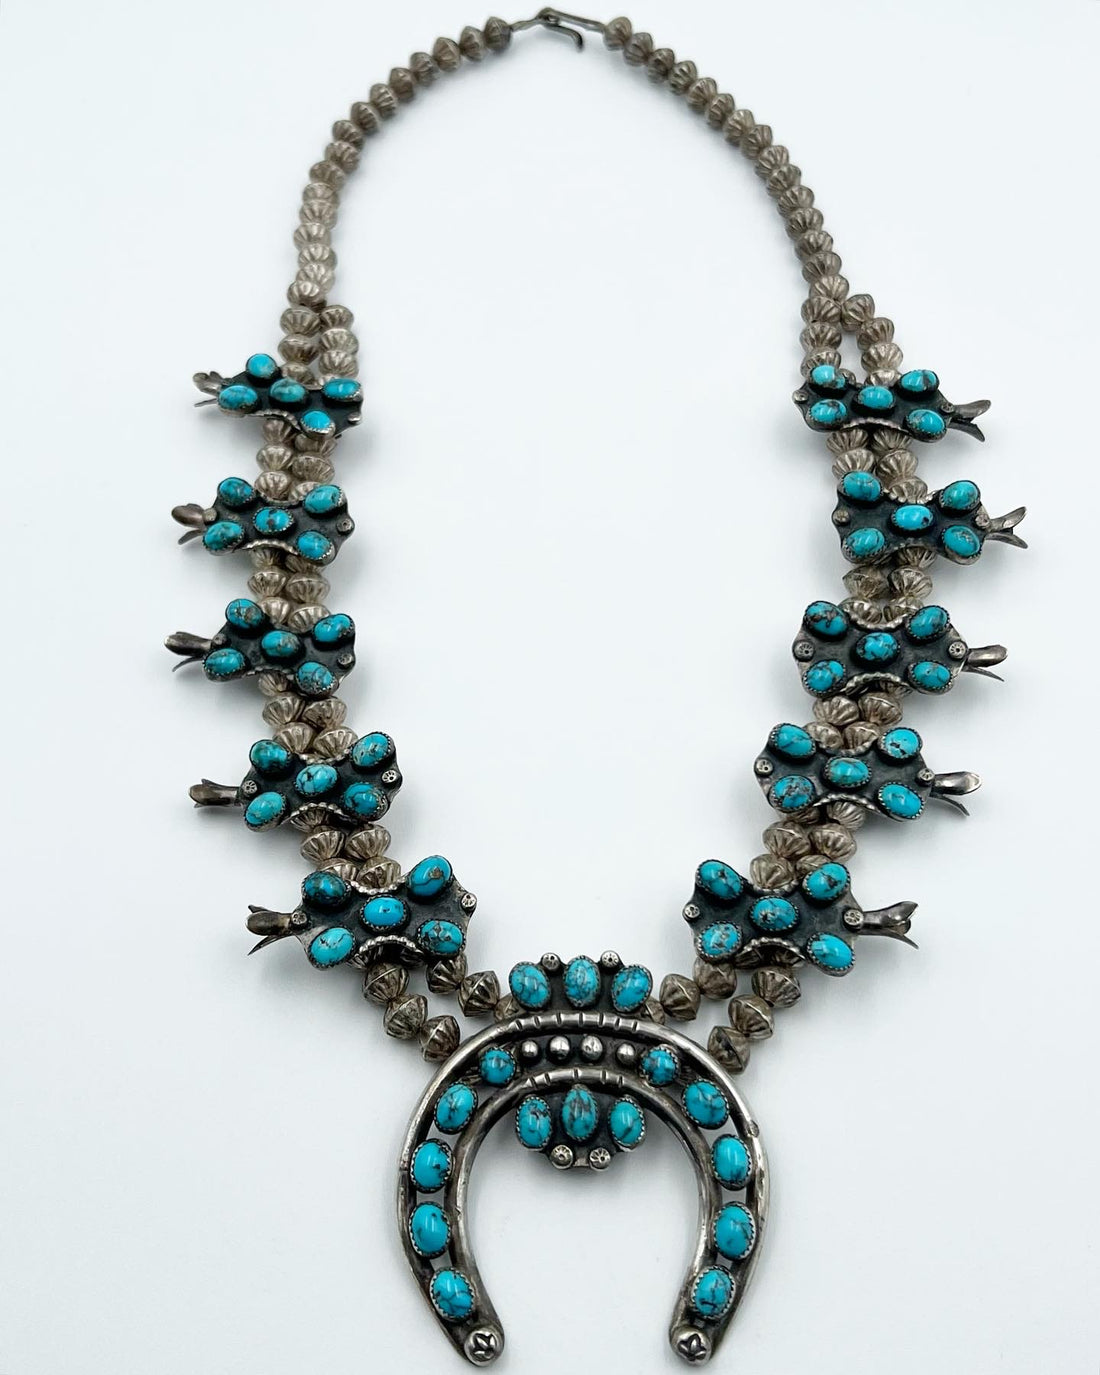 Vintage Persian Turquoise Squash Blossom Necklace